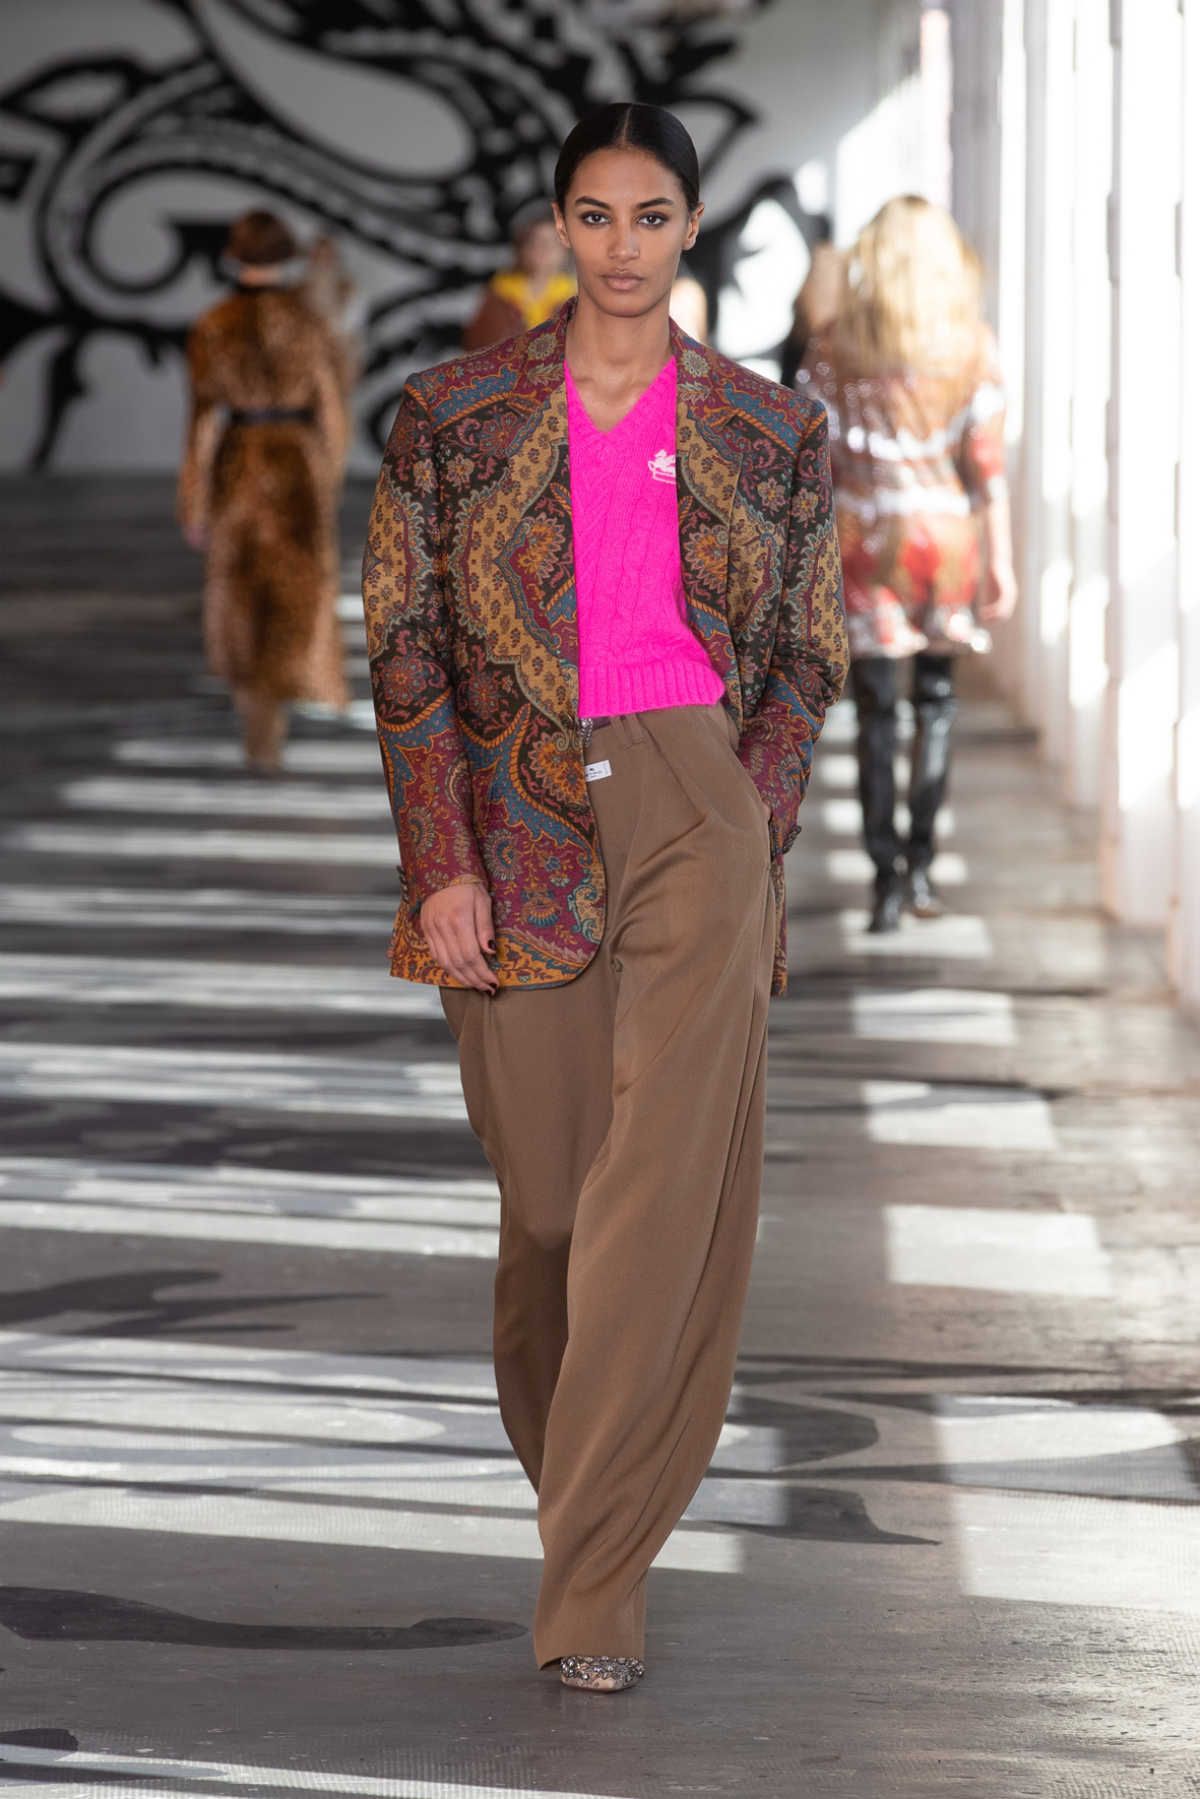 Etro Presents Its Women's Fall Winter 2021/22 Collection